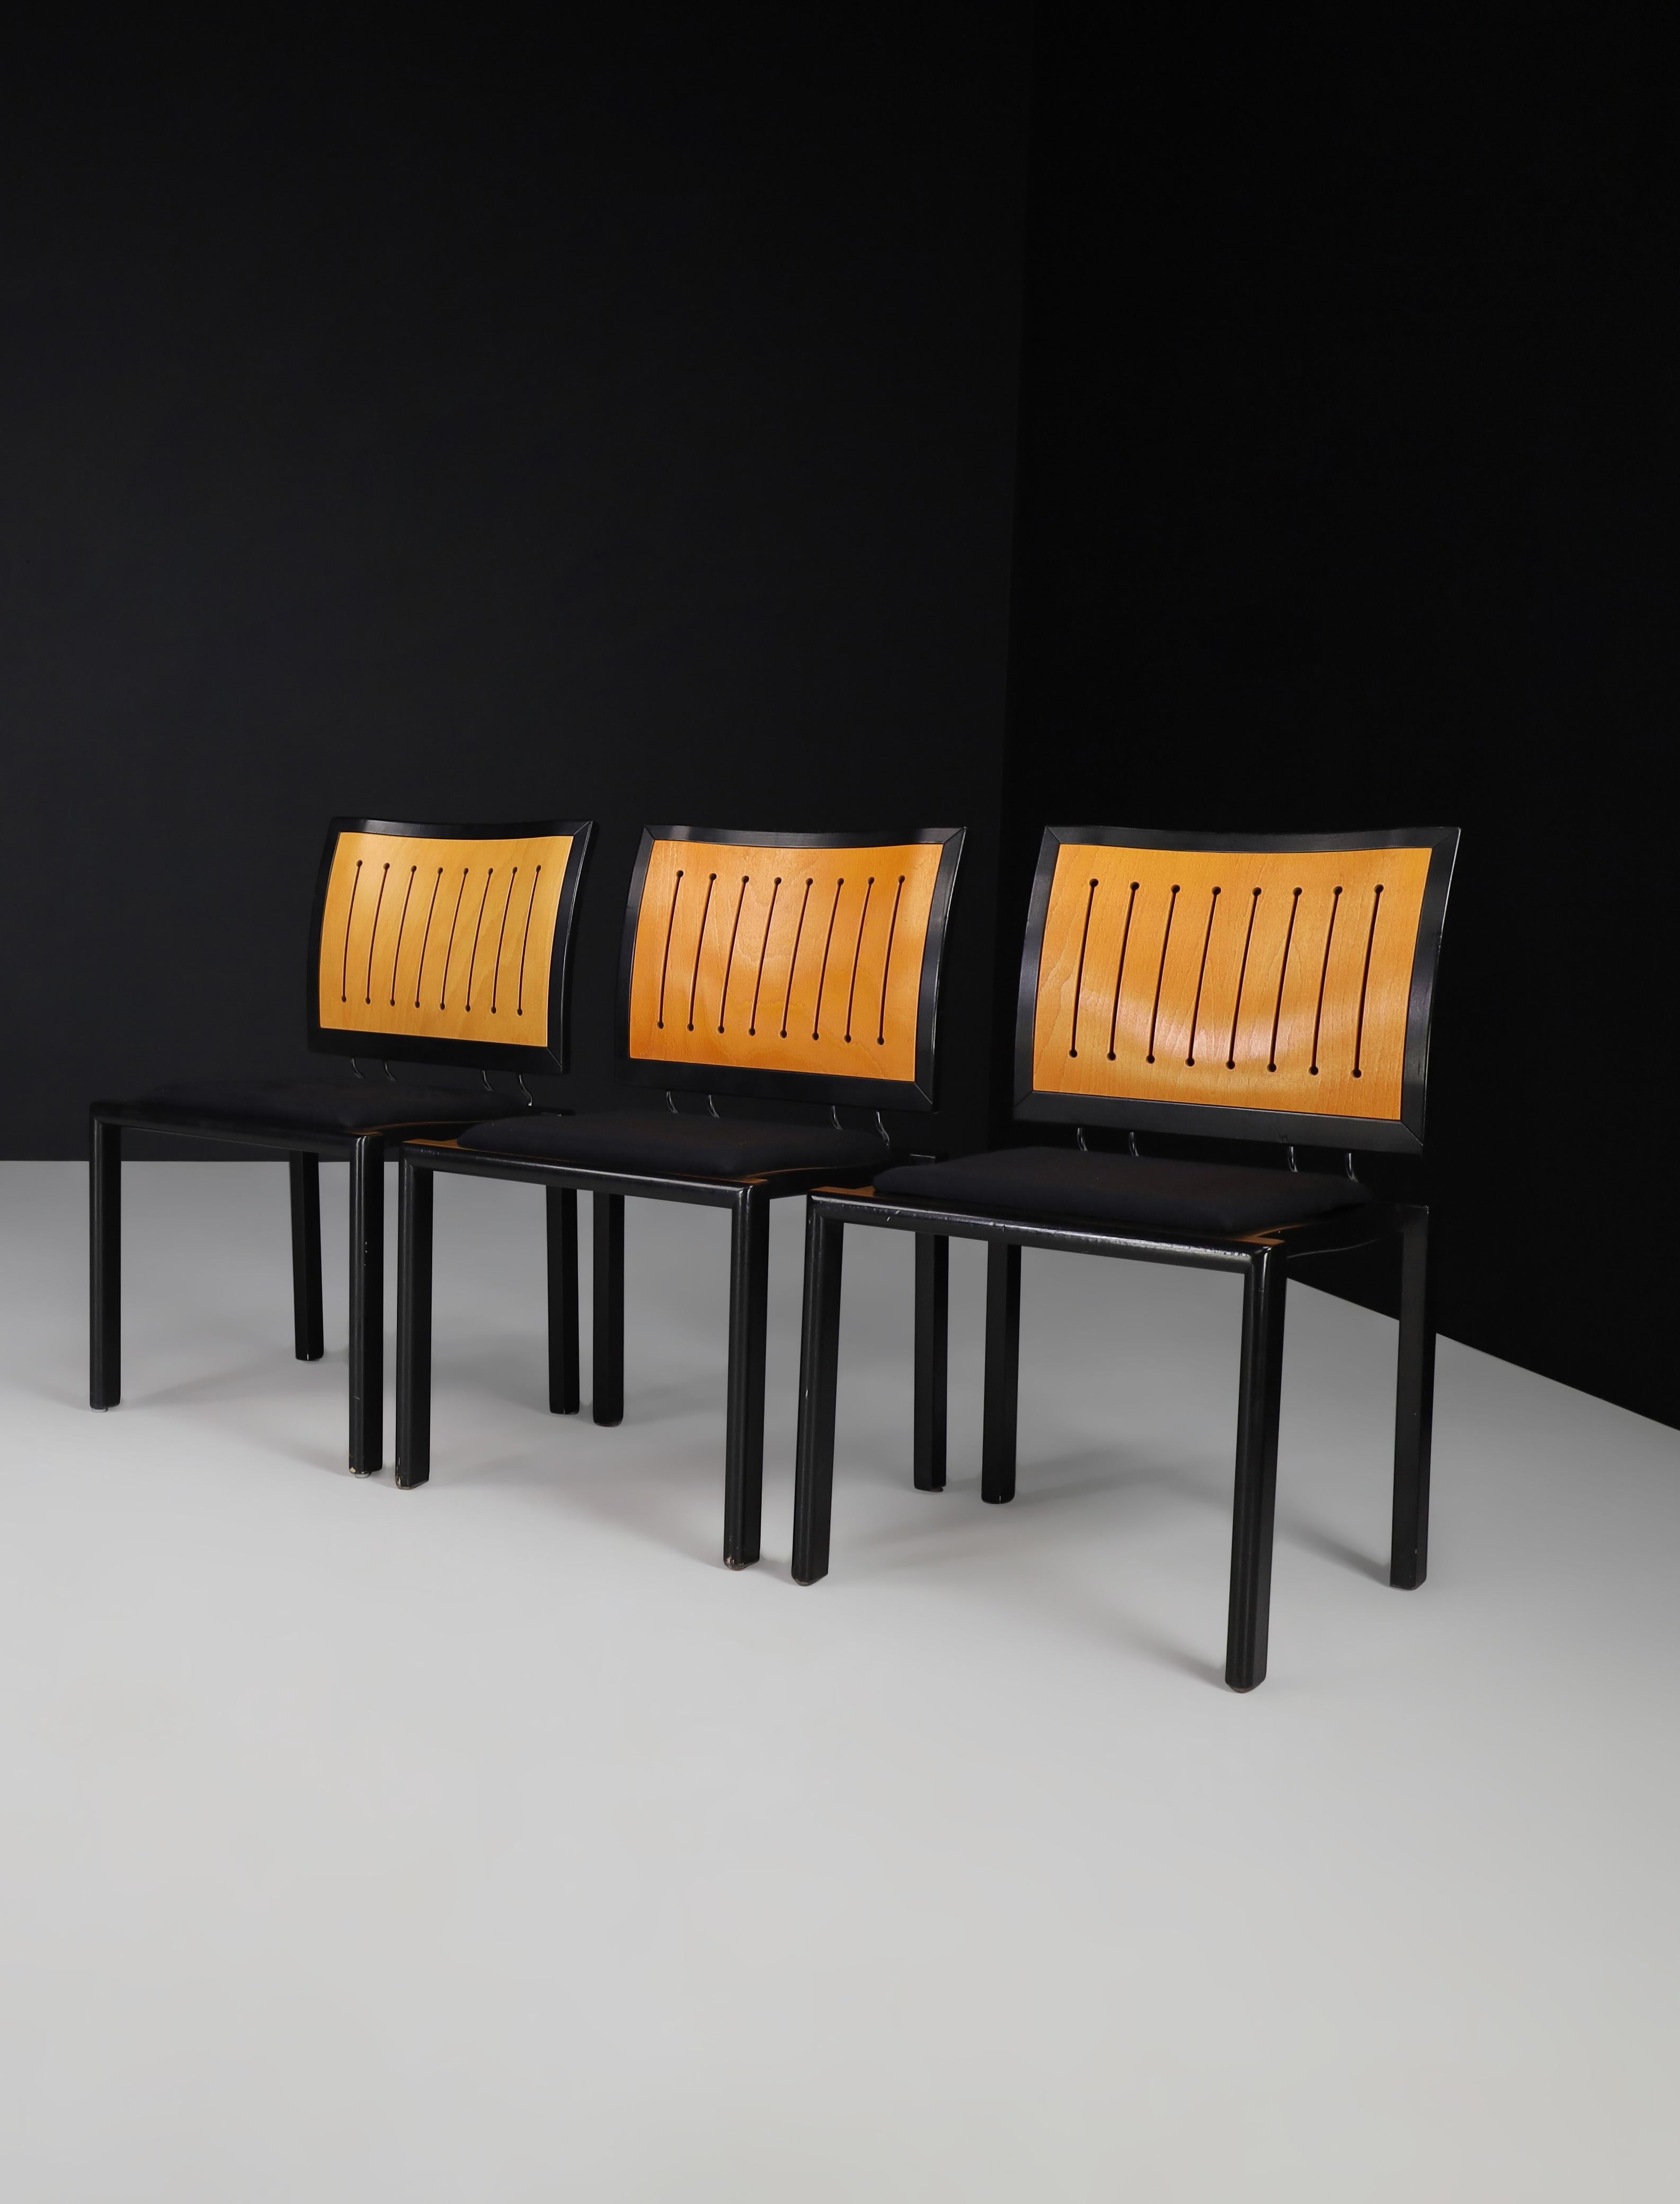 Quadro Chairs by Bruno Rey & Charles Polin for Dietiker, Switzerland, 1980s For Sale 5